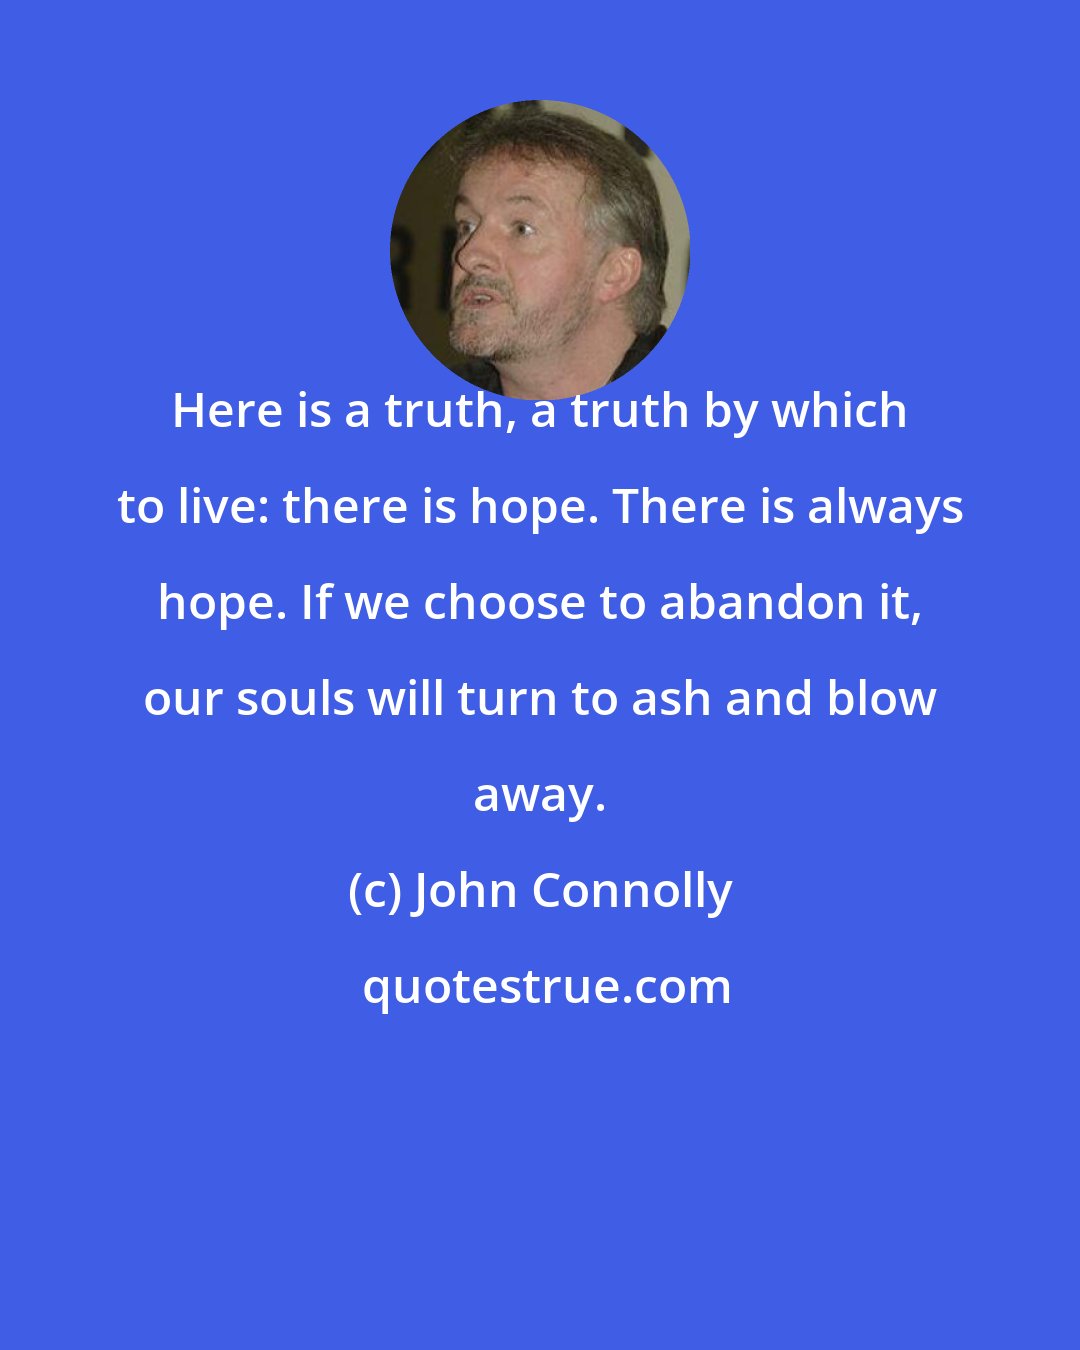 John Connolly: Here is a truth, a truth by which to live: there is hope. There is always hope. If we choose to abandon it, our souls will turn to ash and blow away.